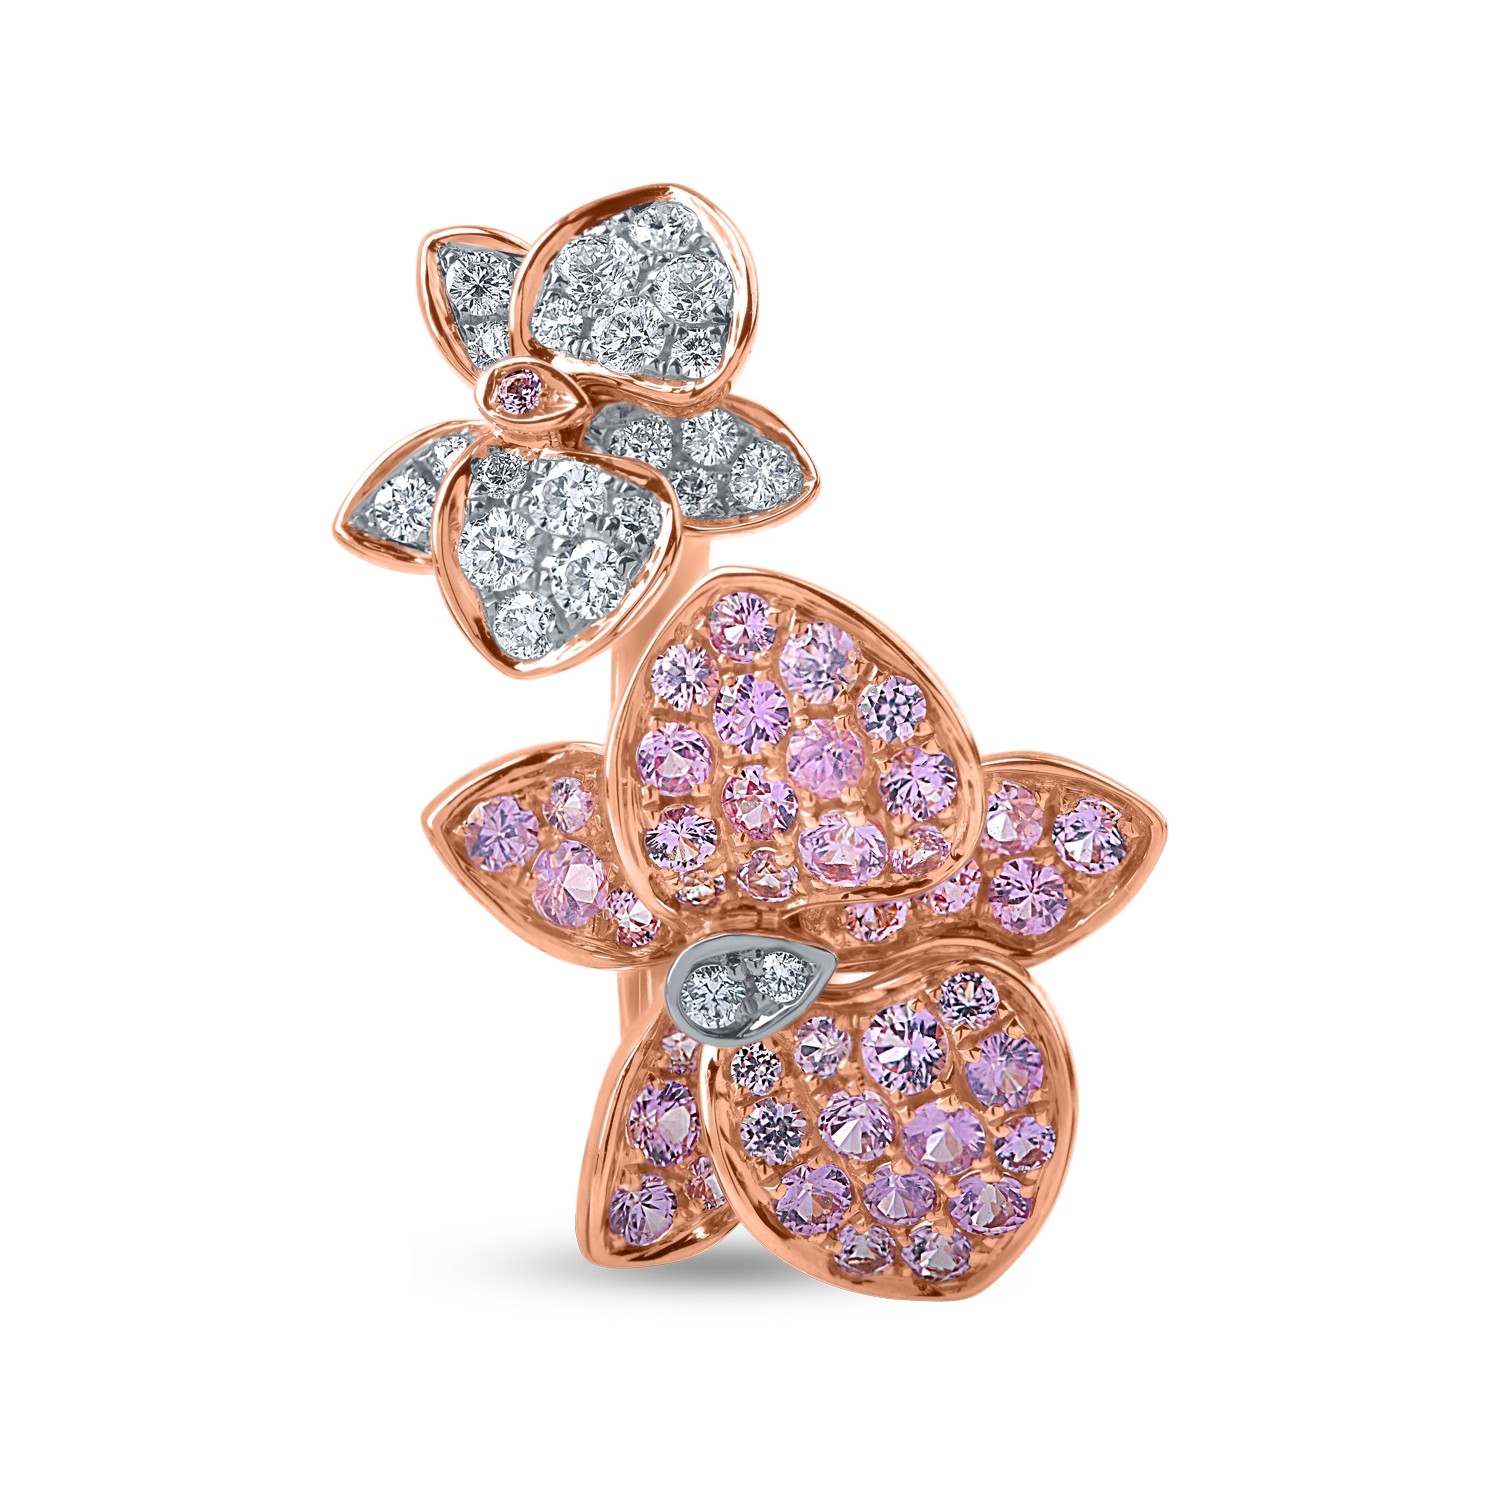 Rose gold flower ring with 0.9ct light pink sapphires and 0.2ct diamonds